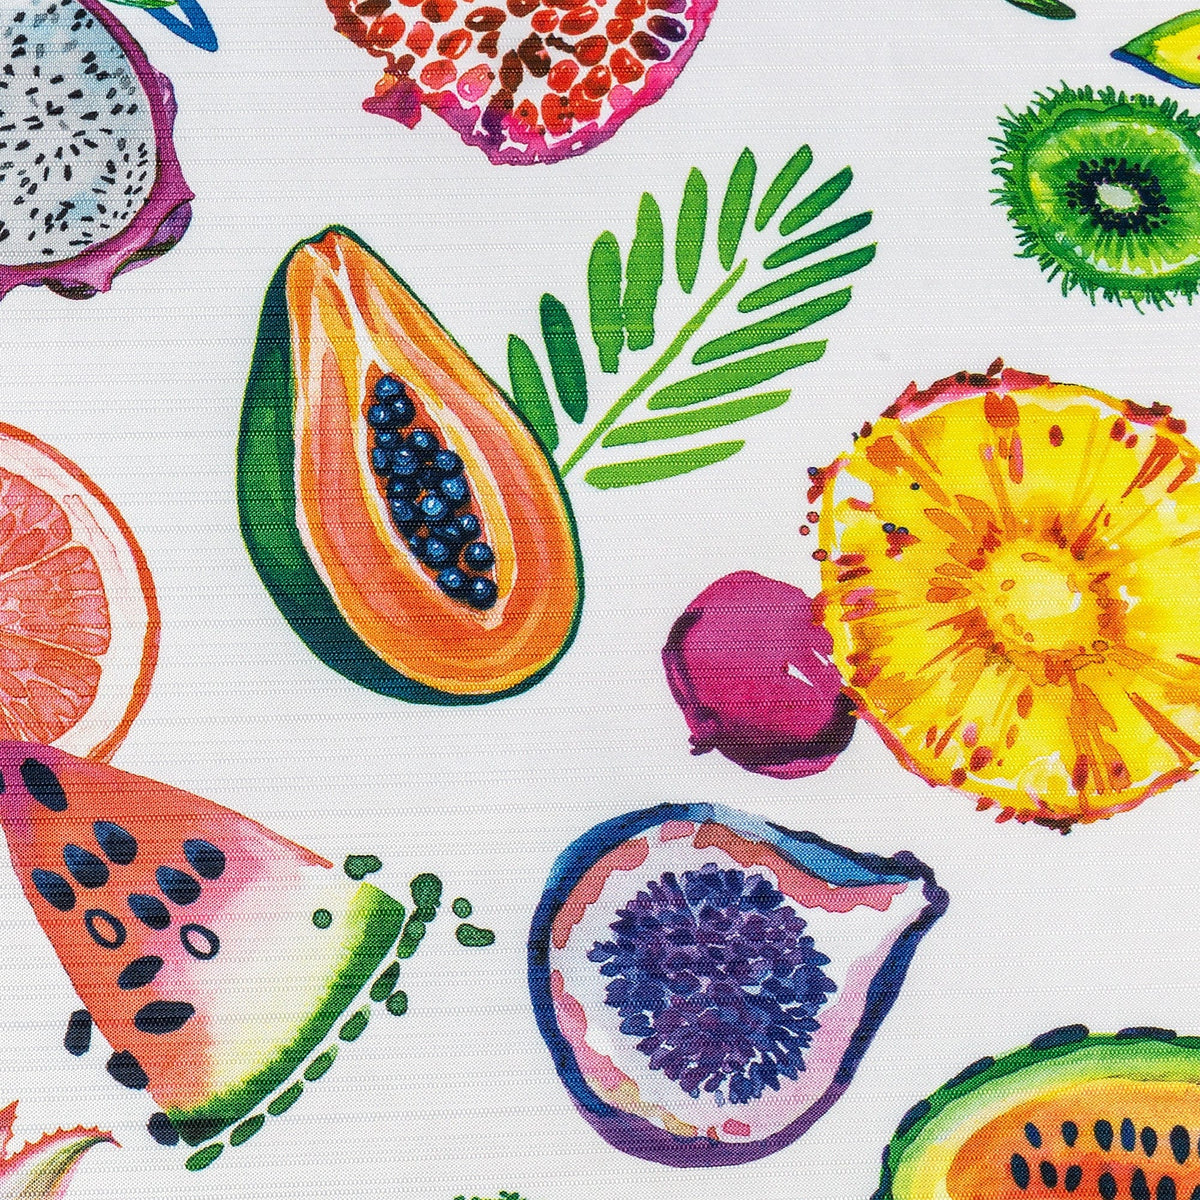 Fruit Punch Woven Printed Tablecloth